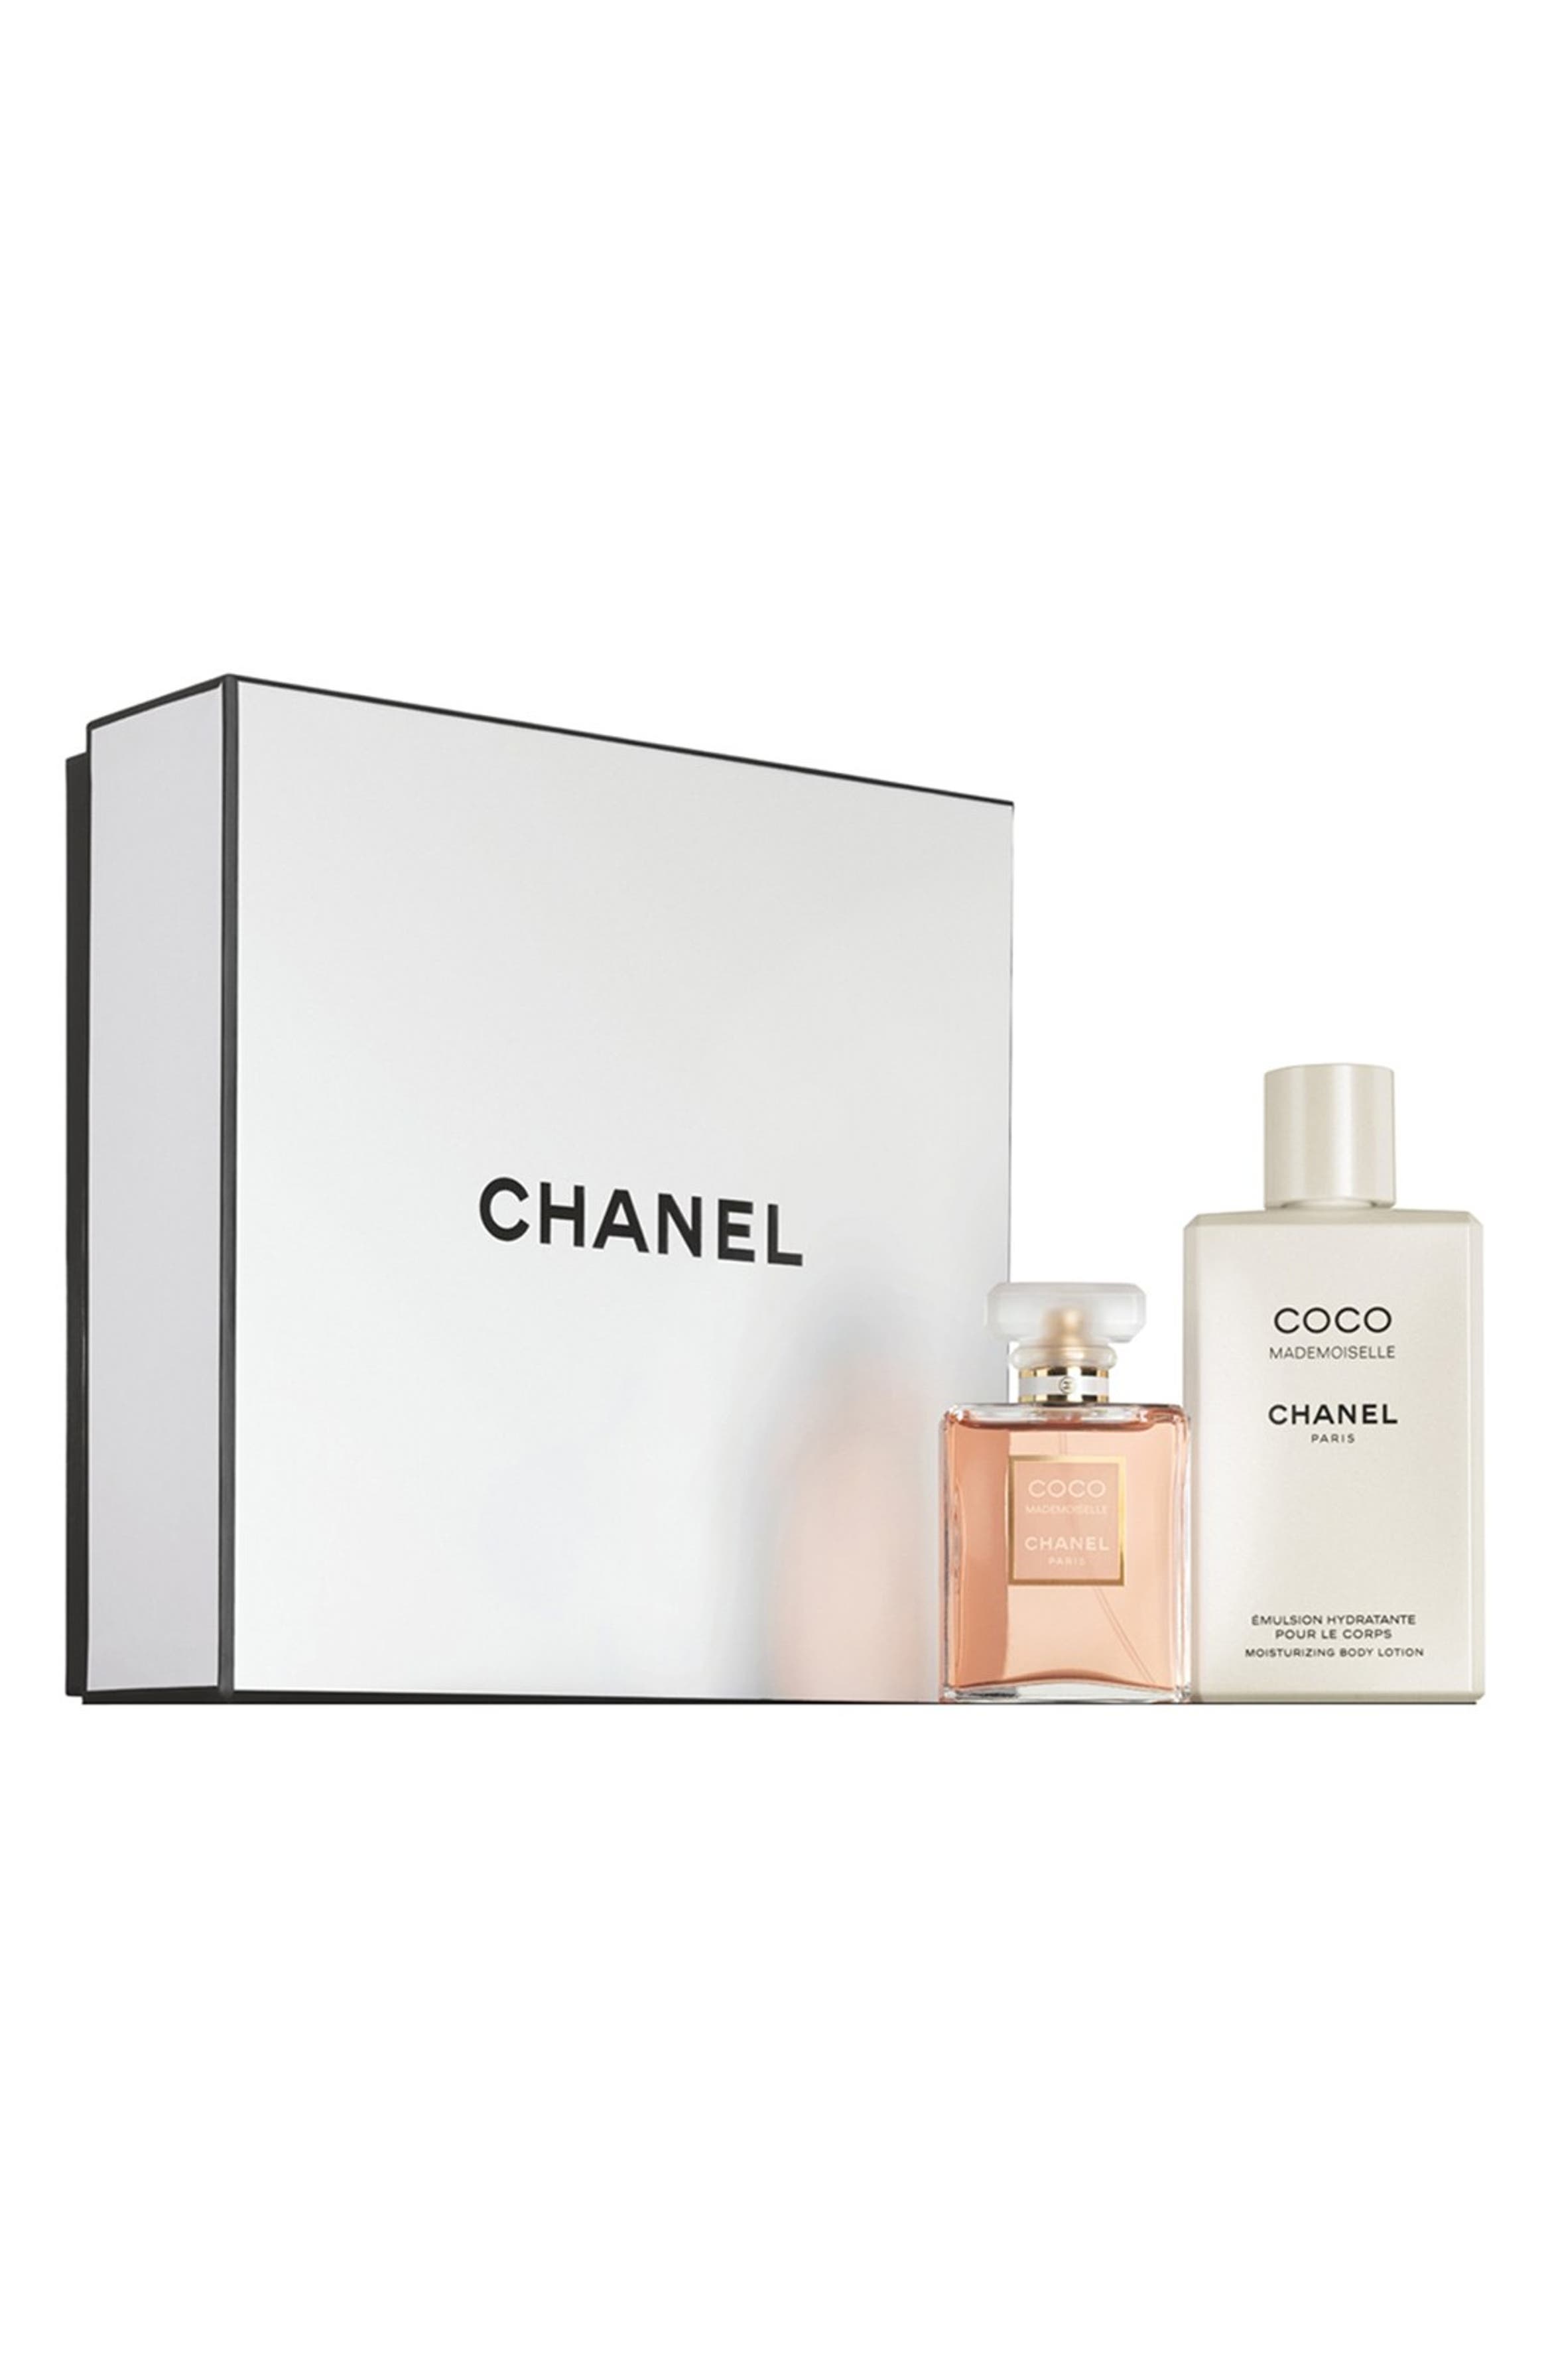 CHANEL COCO MADEMOISELLE Duo Set | Nordstrom